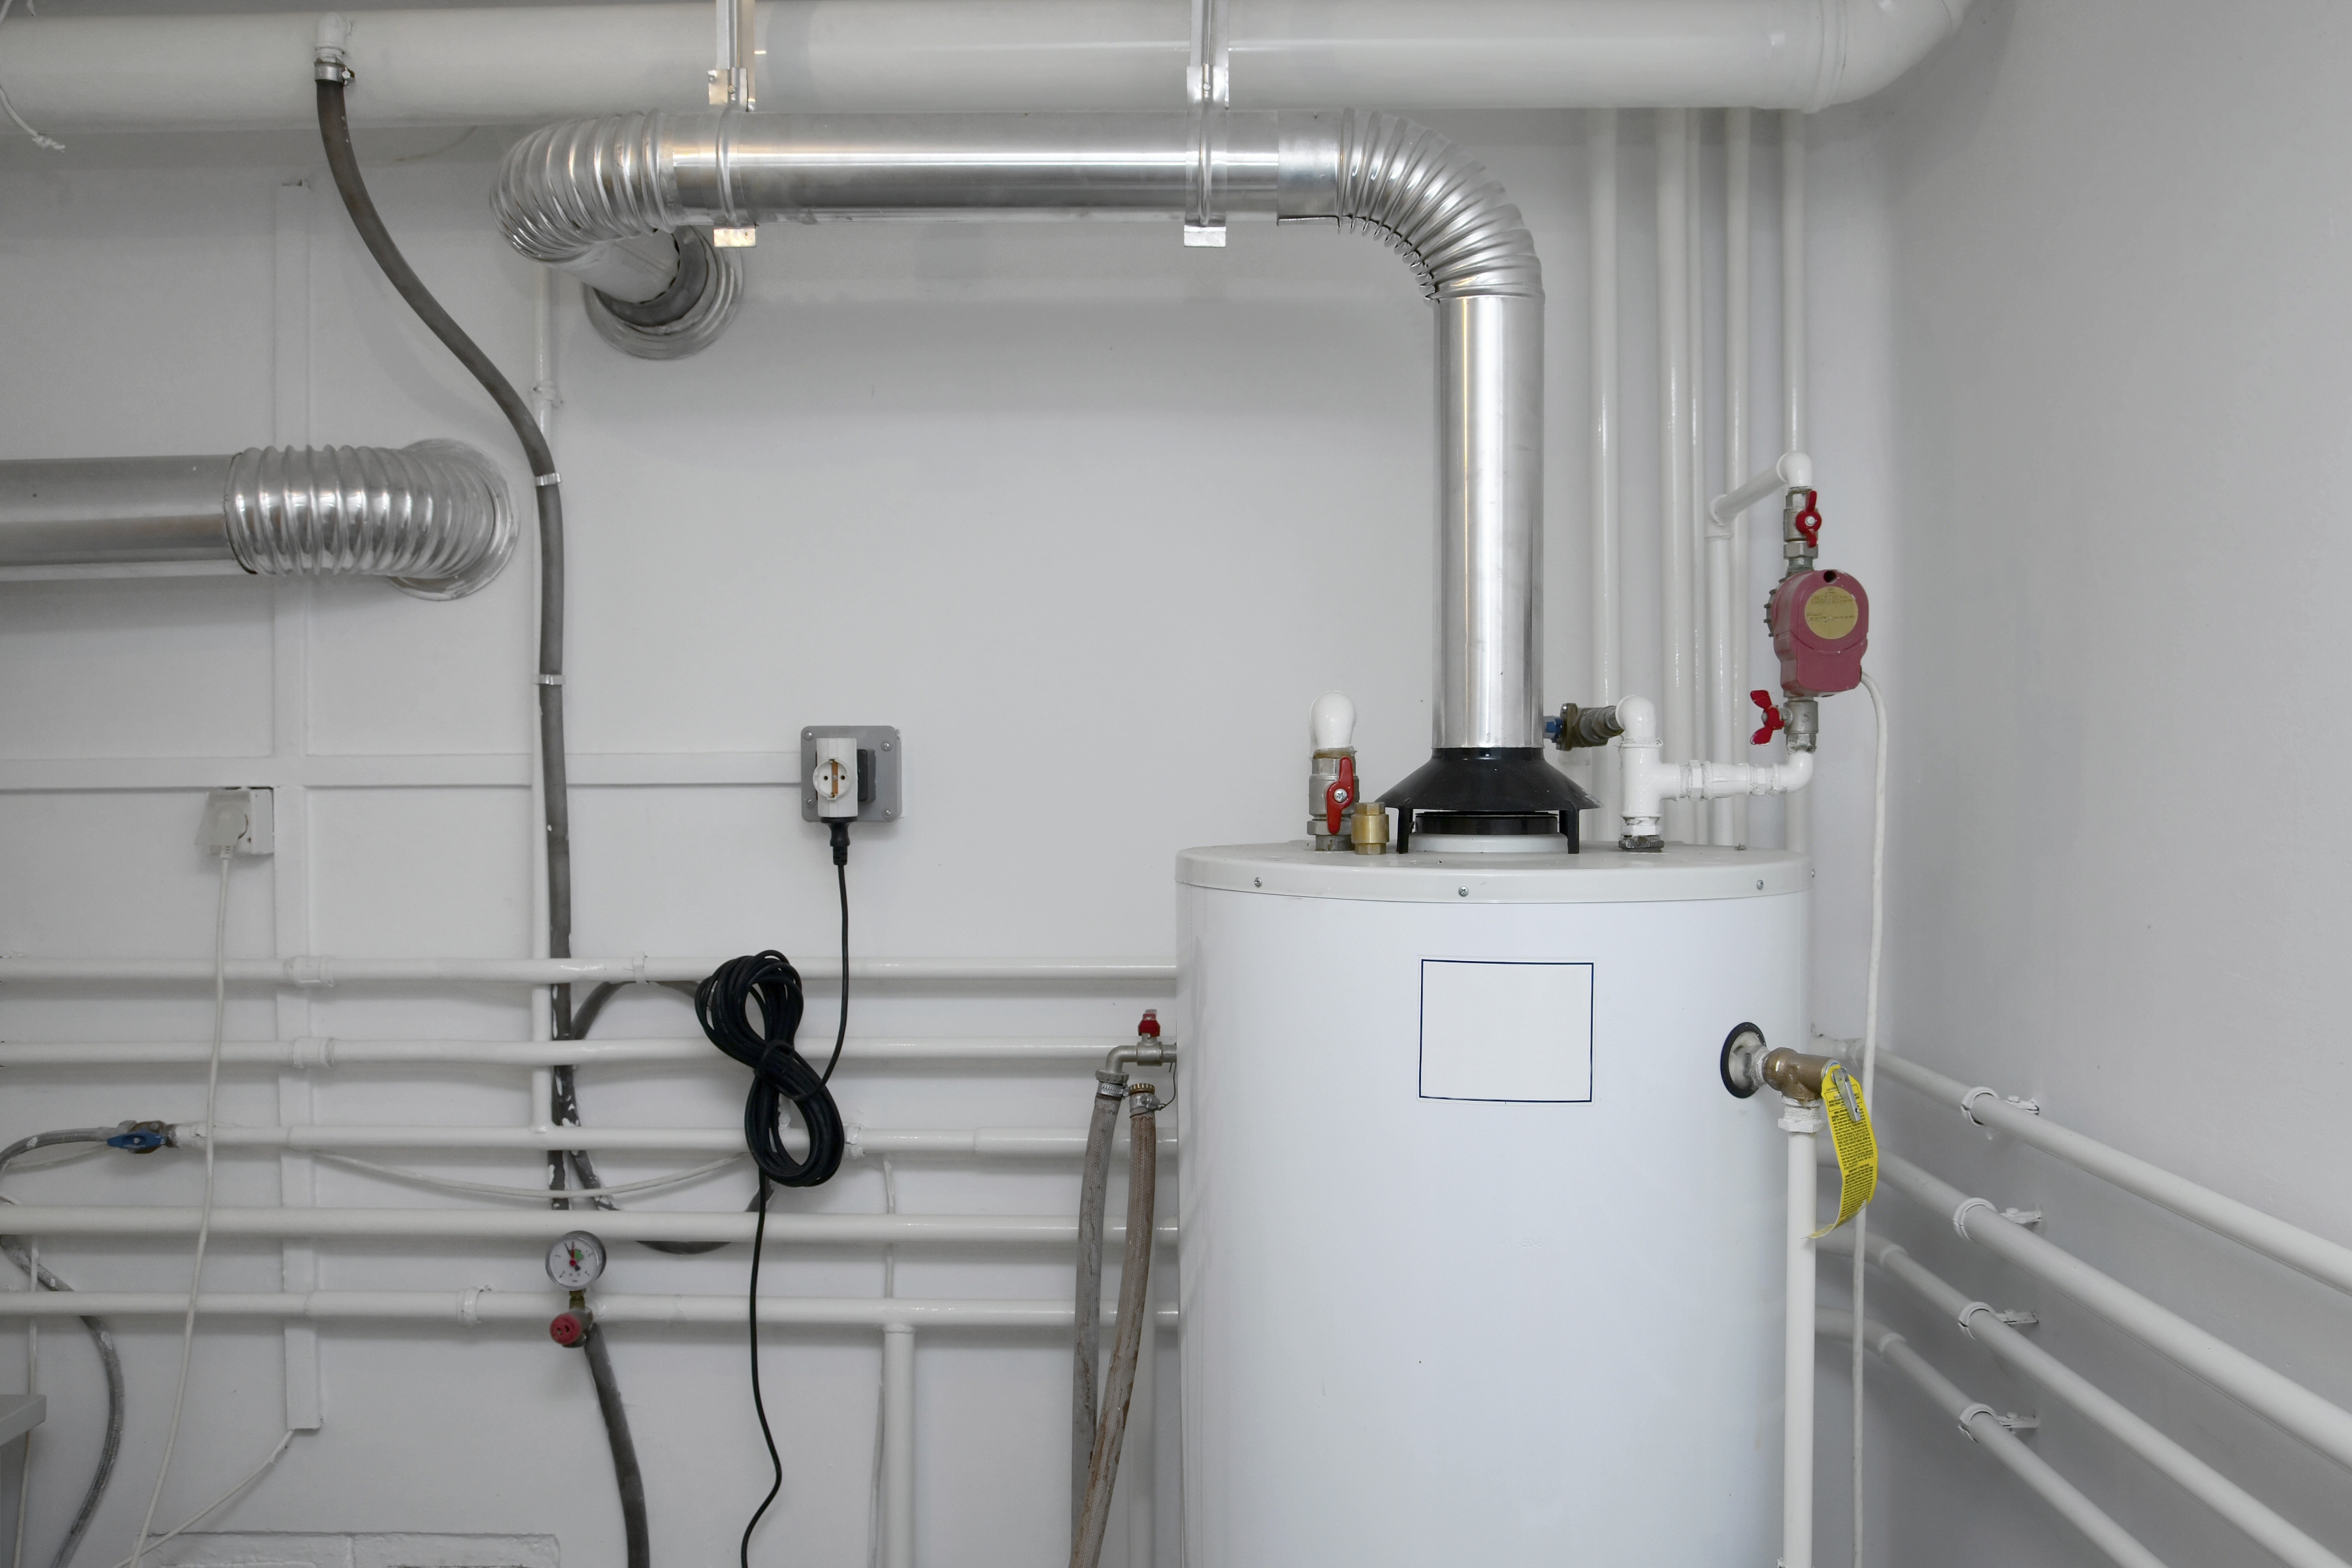 How to save when you buy your next water heater